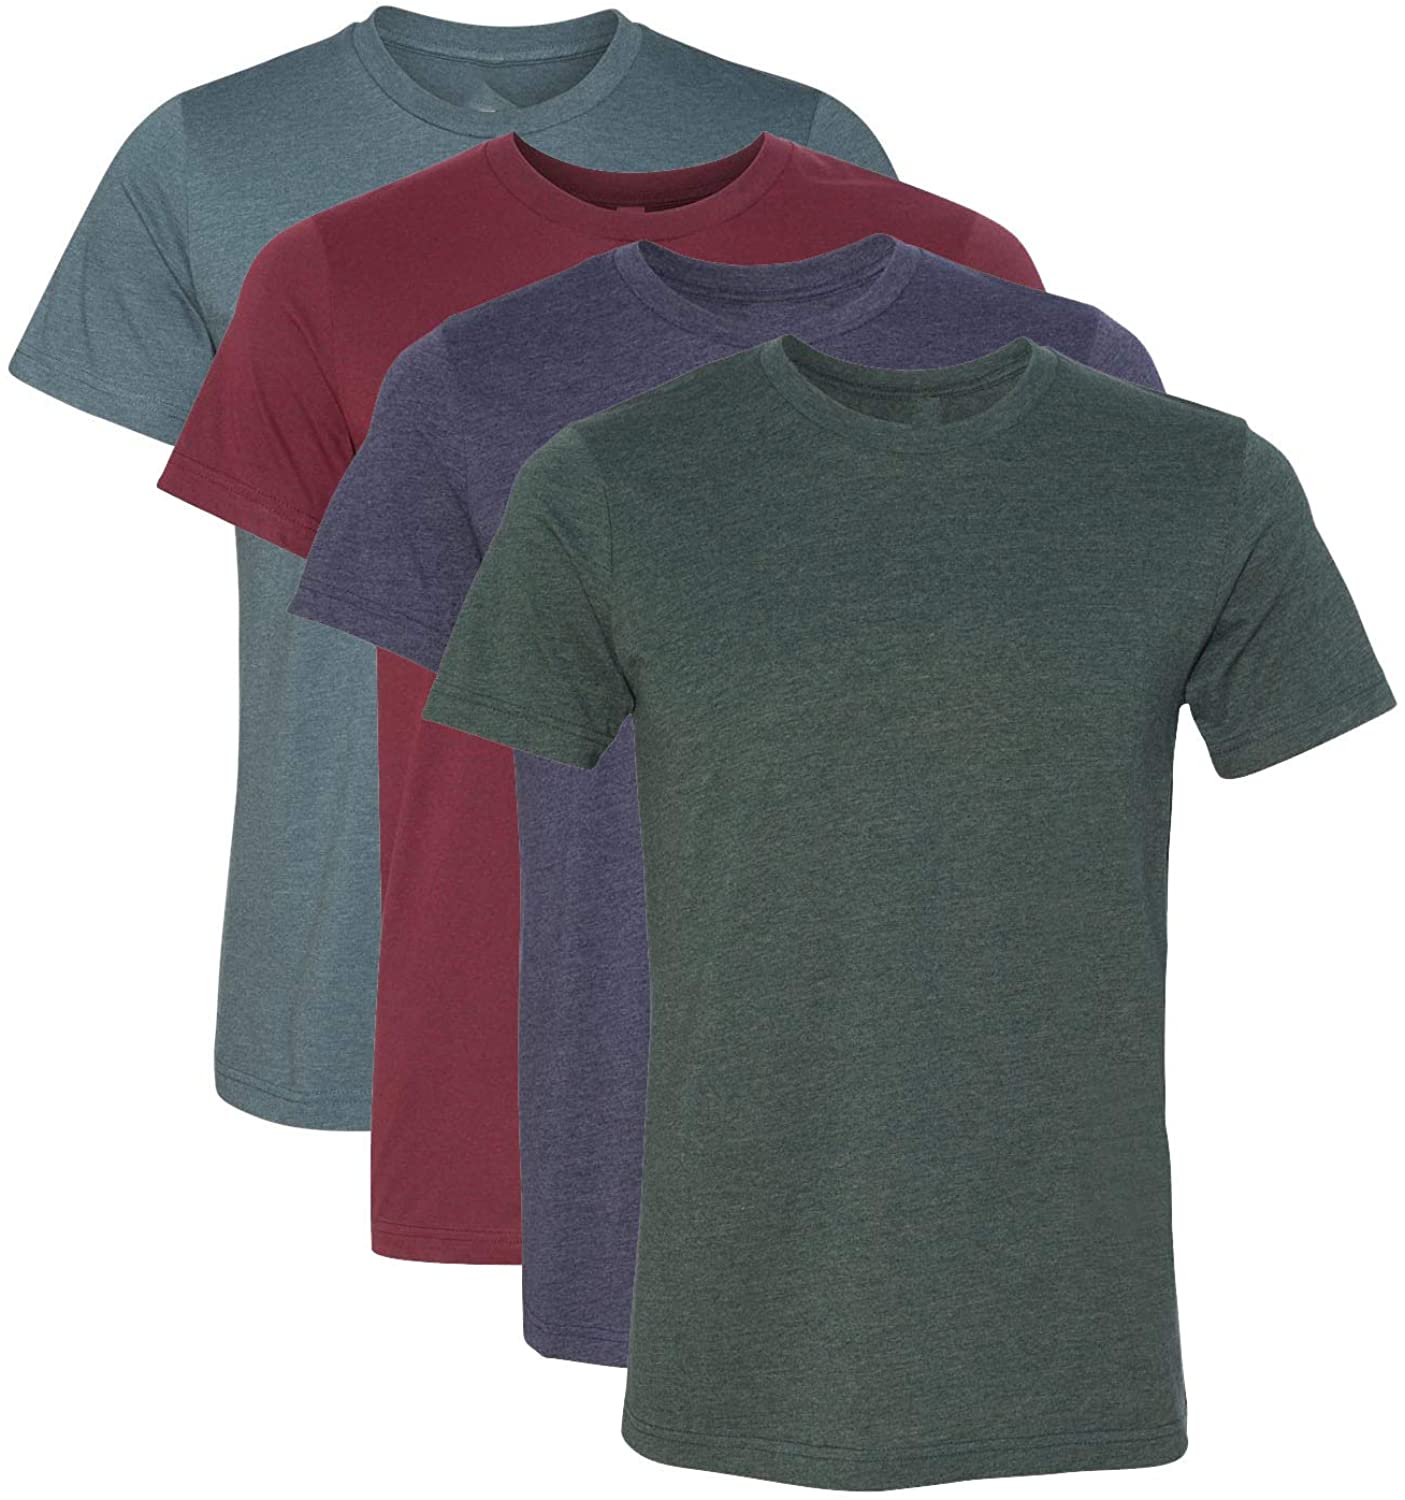 Kennedy Todd 4 Pack Men's Heather Cotton Poly T-Shirt